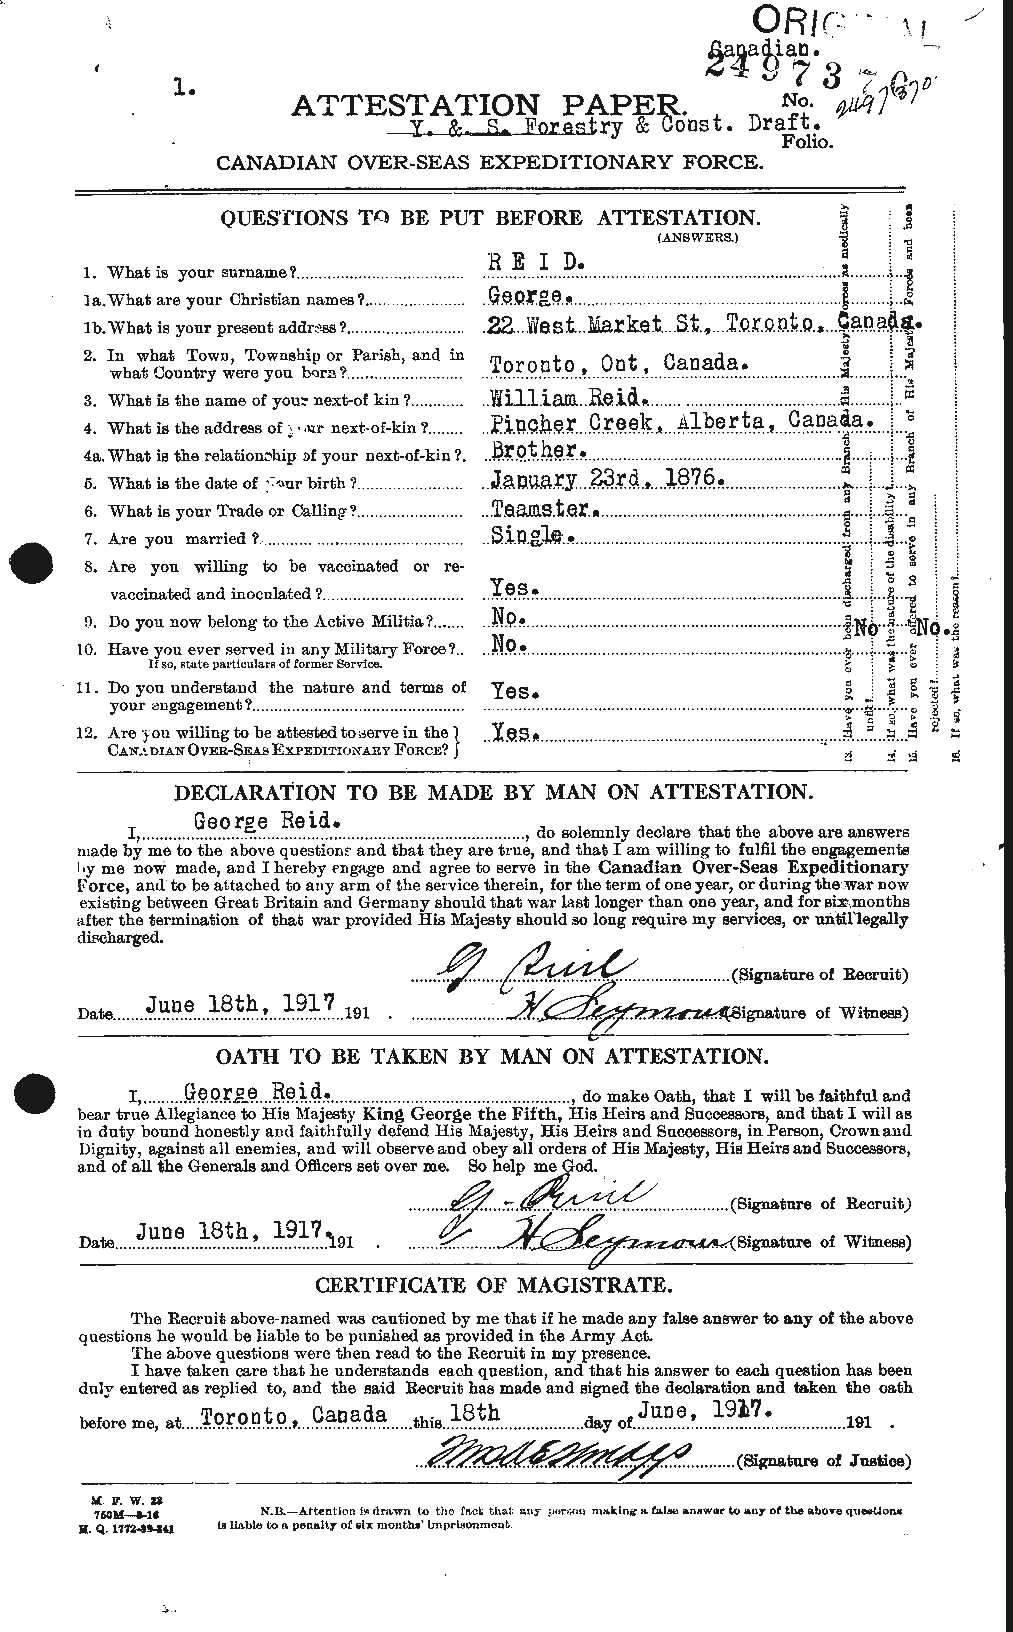 Personnel Records of the First World War - CEF 596280a